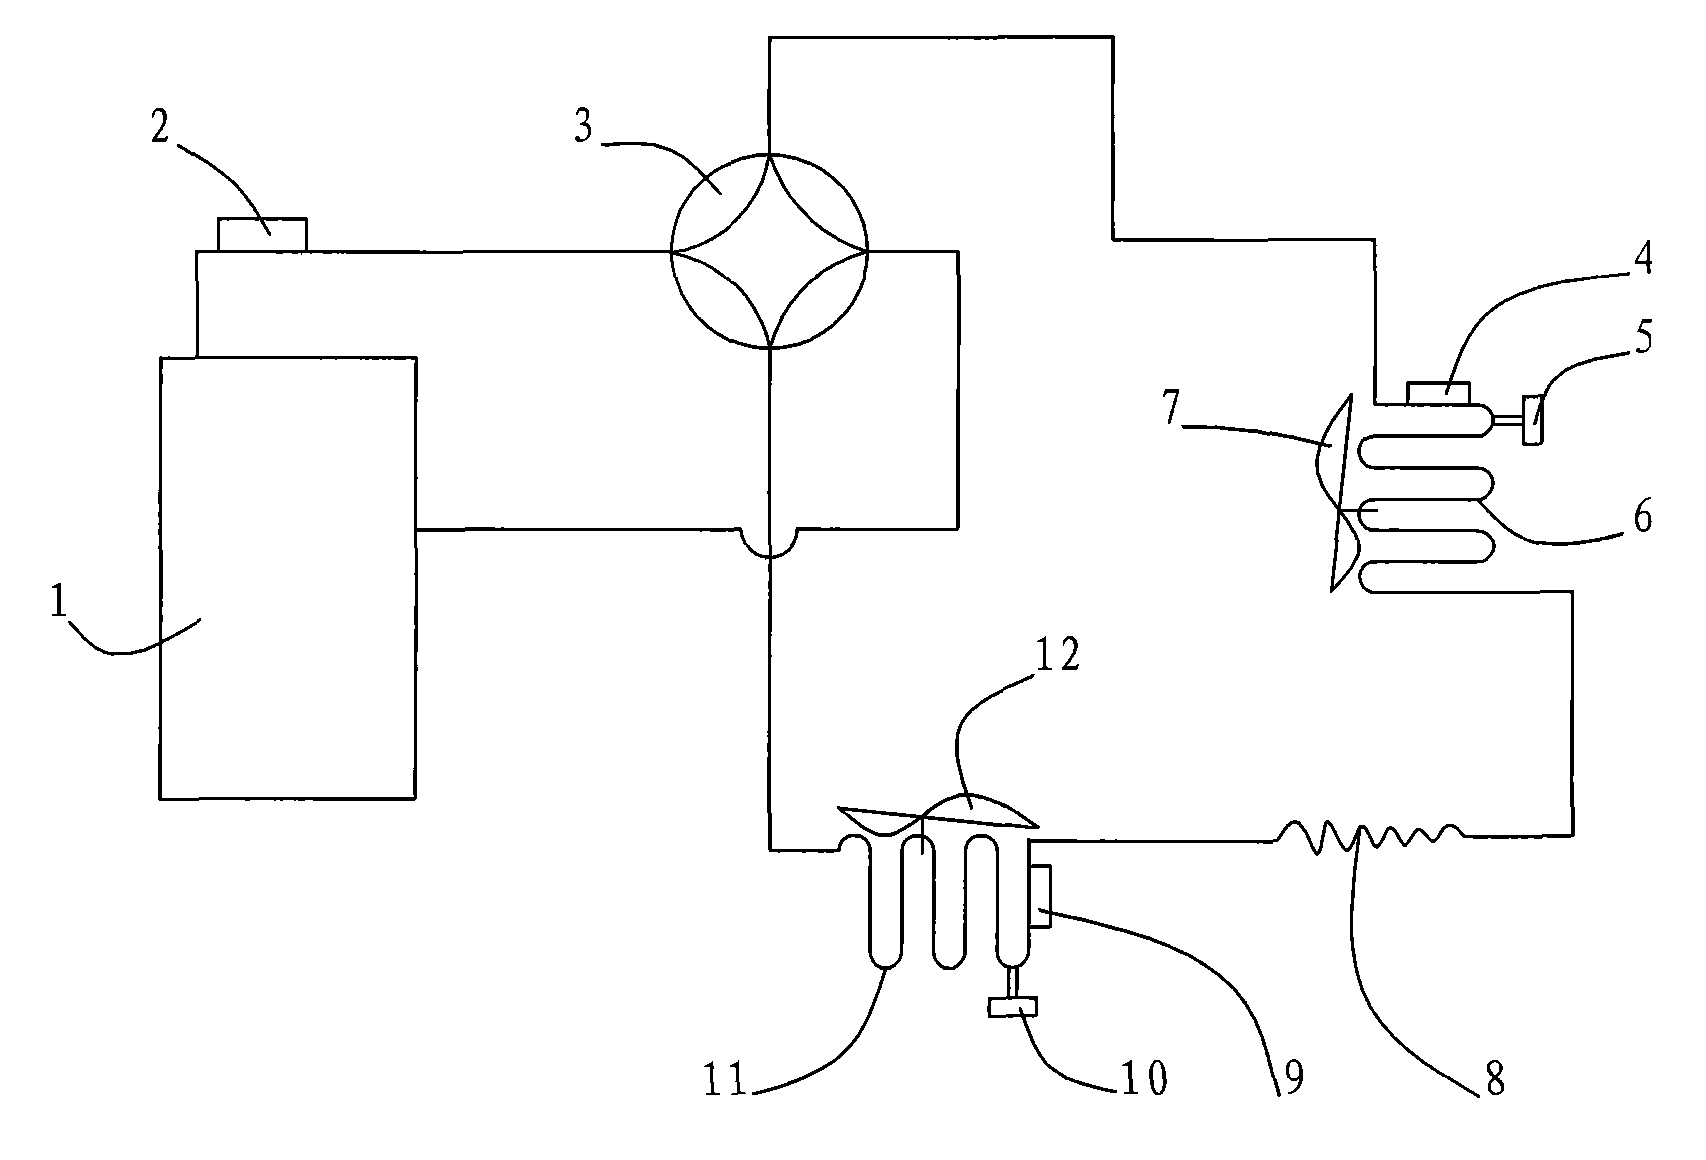 Control method of variable frequency air conditioner